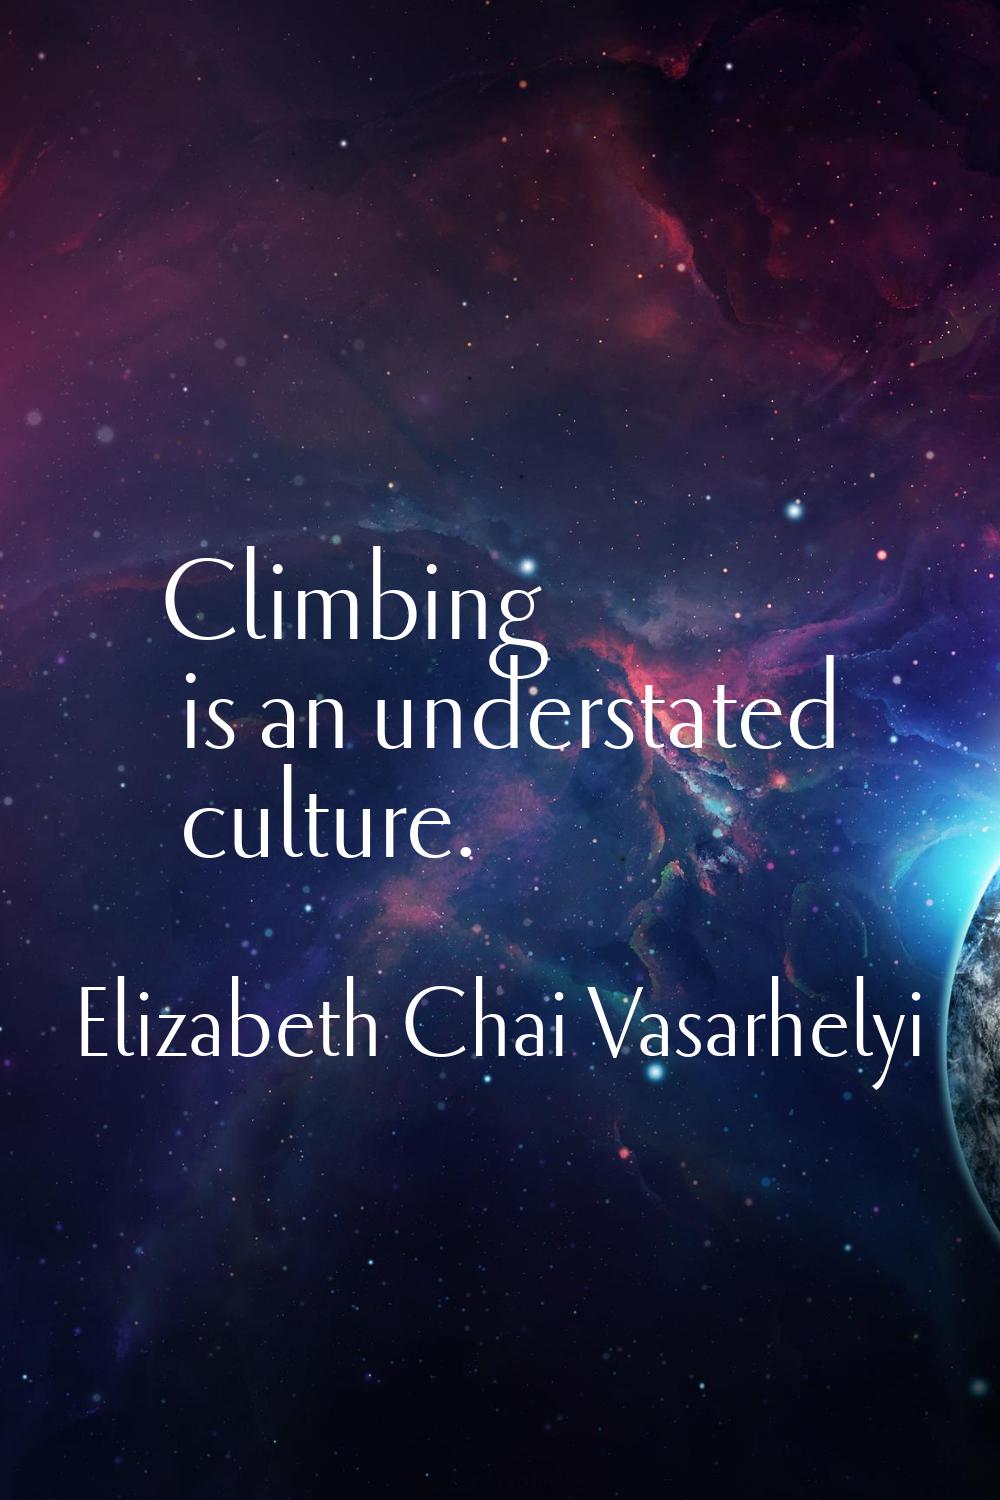 Climbing is an understated culture.